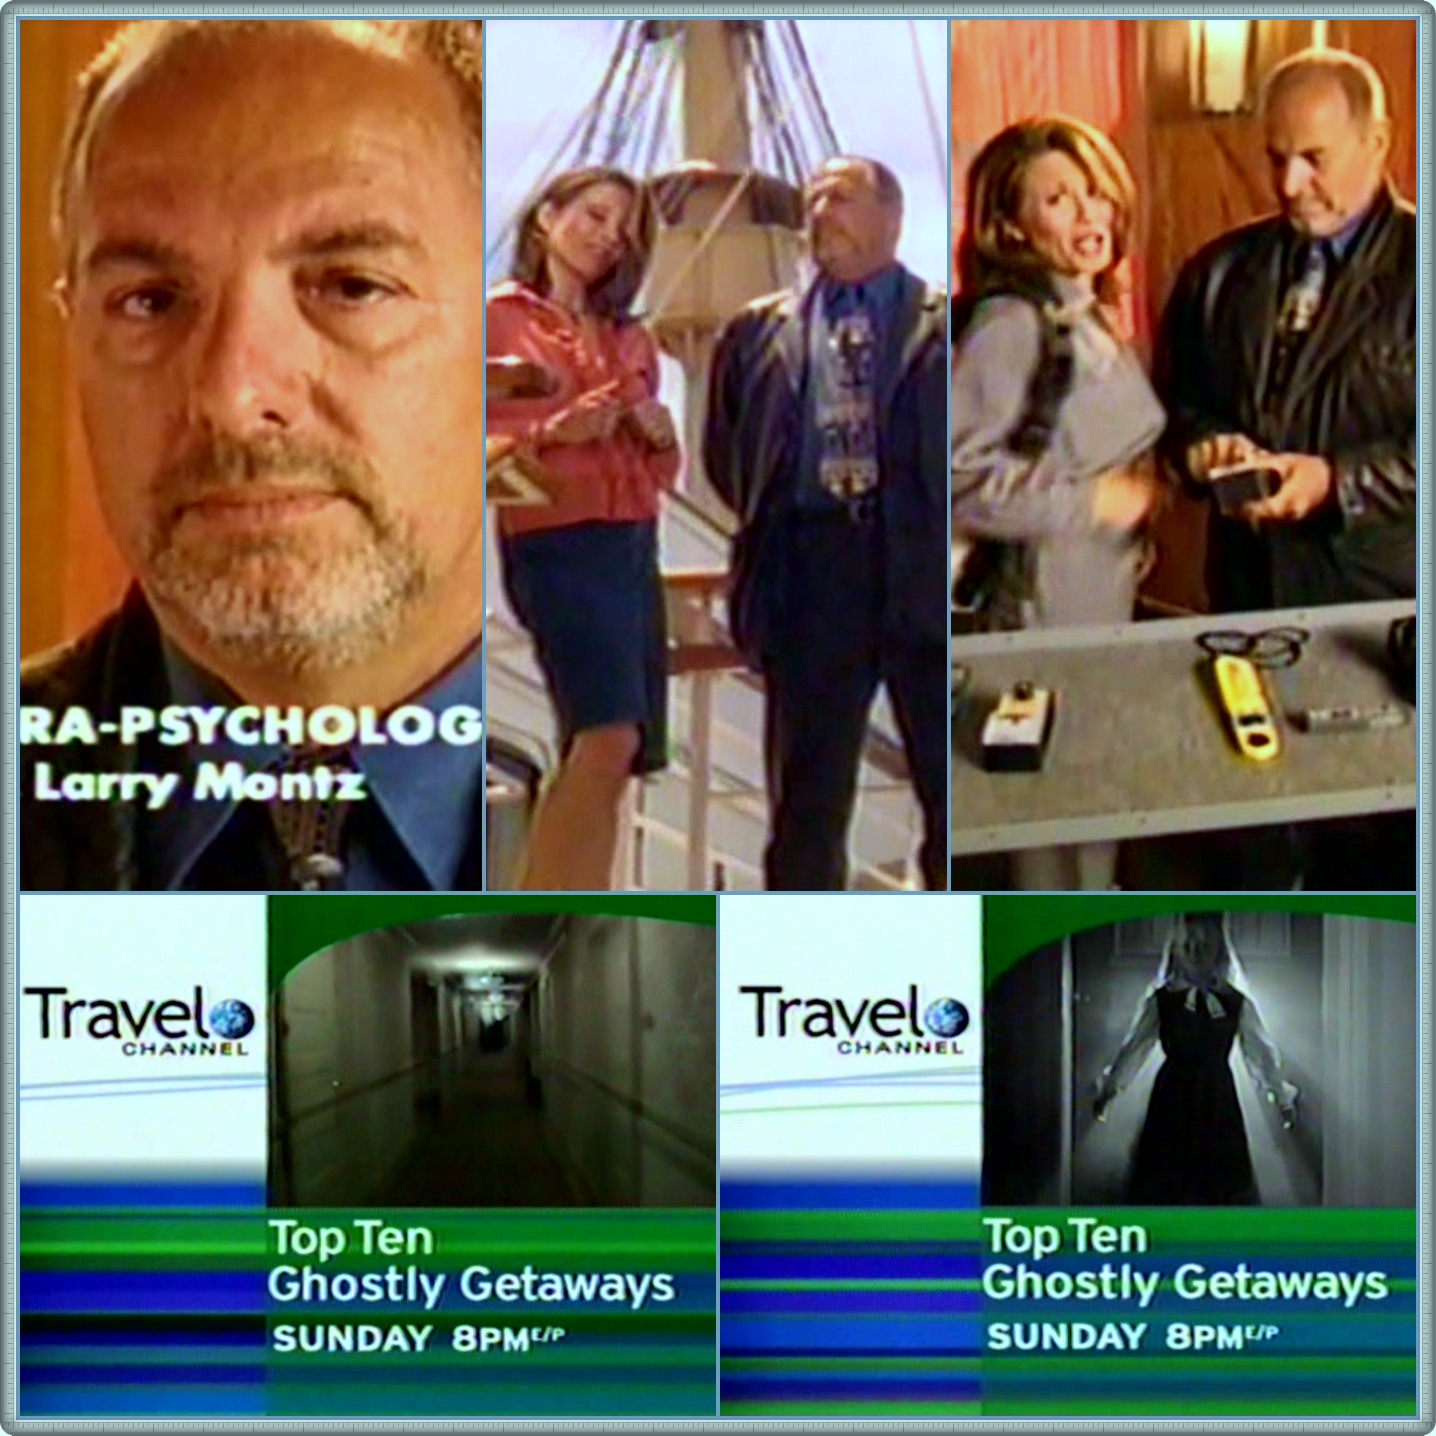 Summer 2002 - Larry Montz and Tracy Gallagher, aboard the Queen Mary, film a series of promos for Travel Channel's TOP TEN GHOSTLY GETAWAYS.